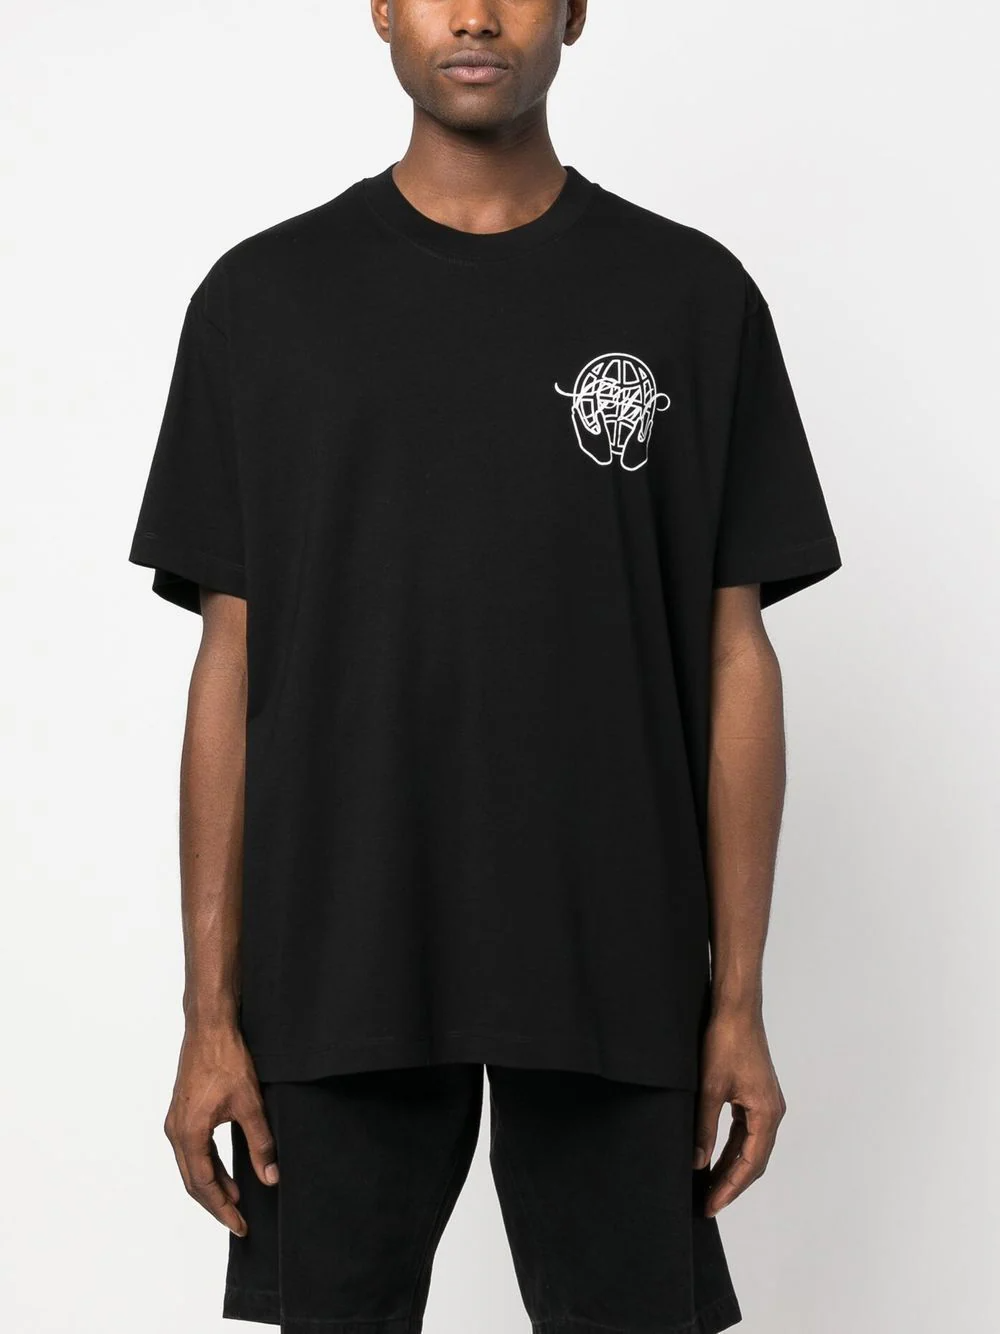 Off-White Hand Arrow Over S/S T-Shirt Black | Hype Vault Kuala Lumpur | Asia's Top Trusted High-End Sneakers and Streetwear Store